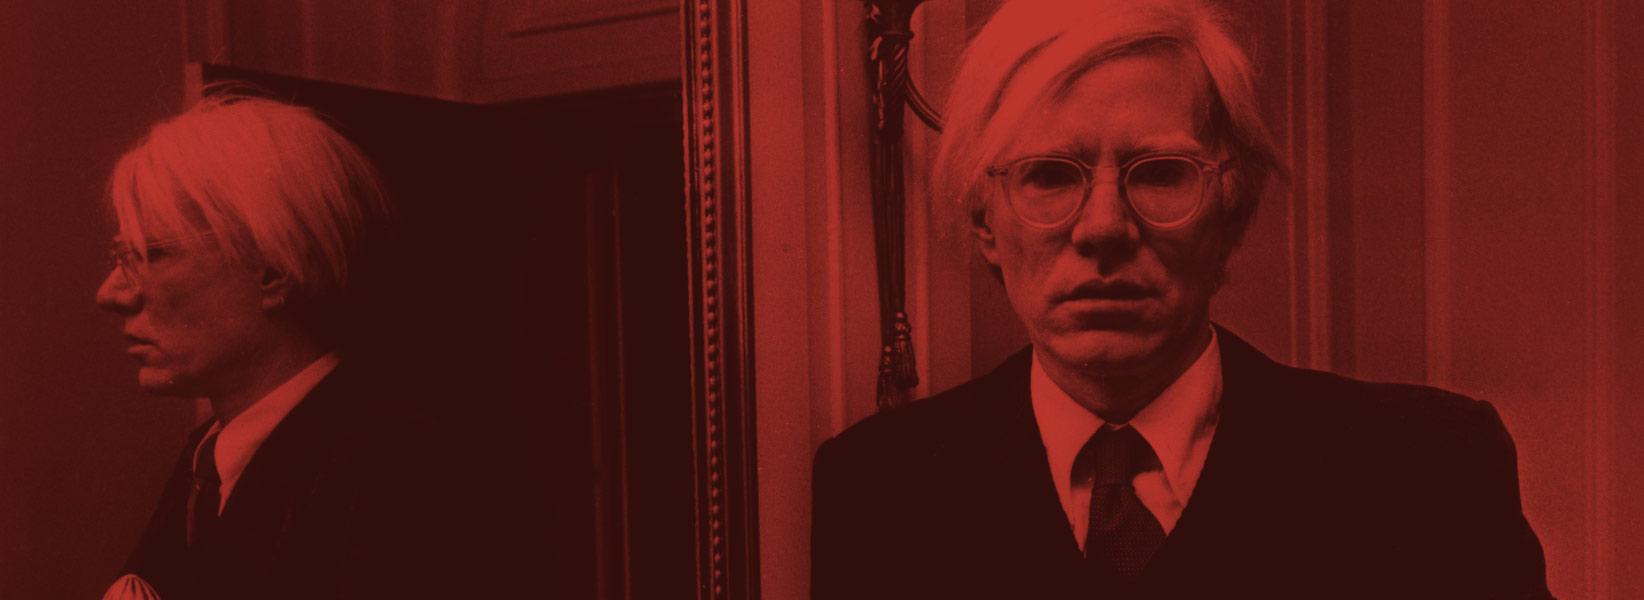 Risk Takers: Andy Warhol- King Fish Media